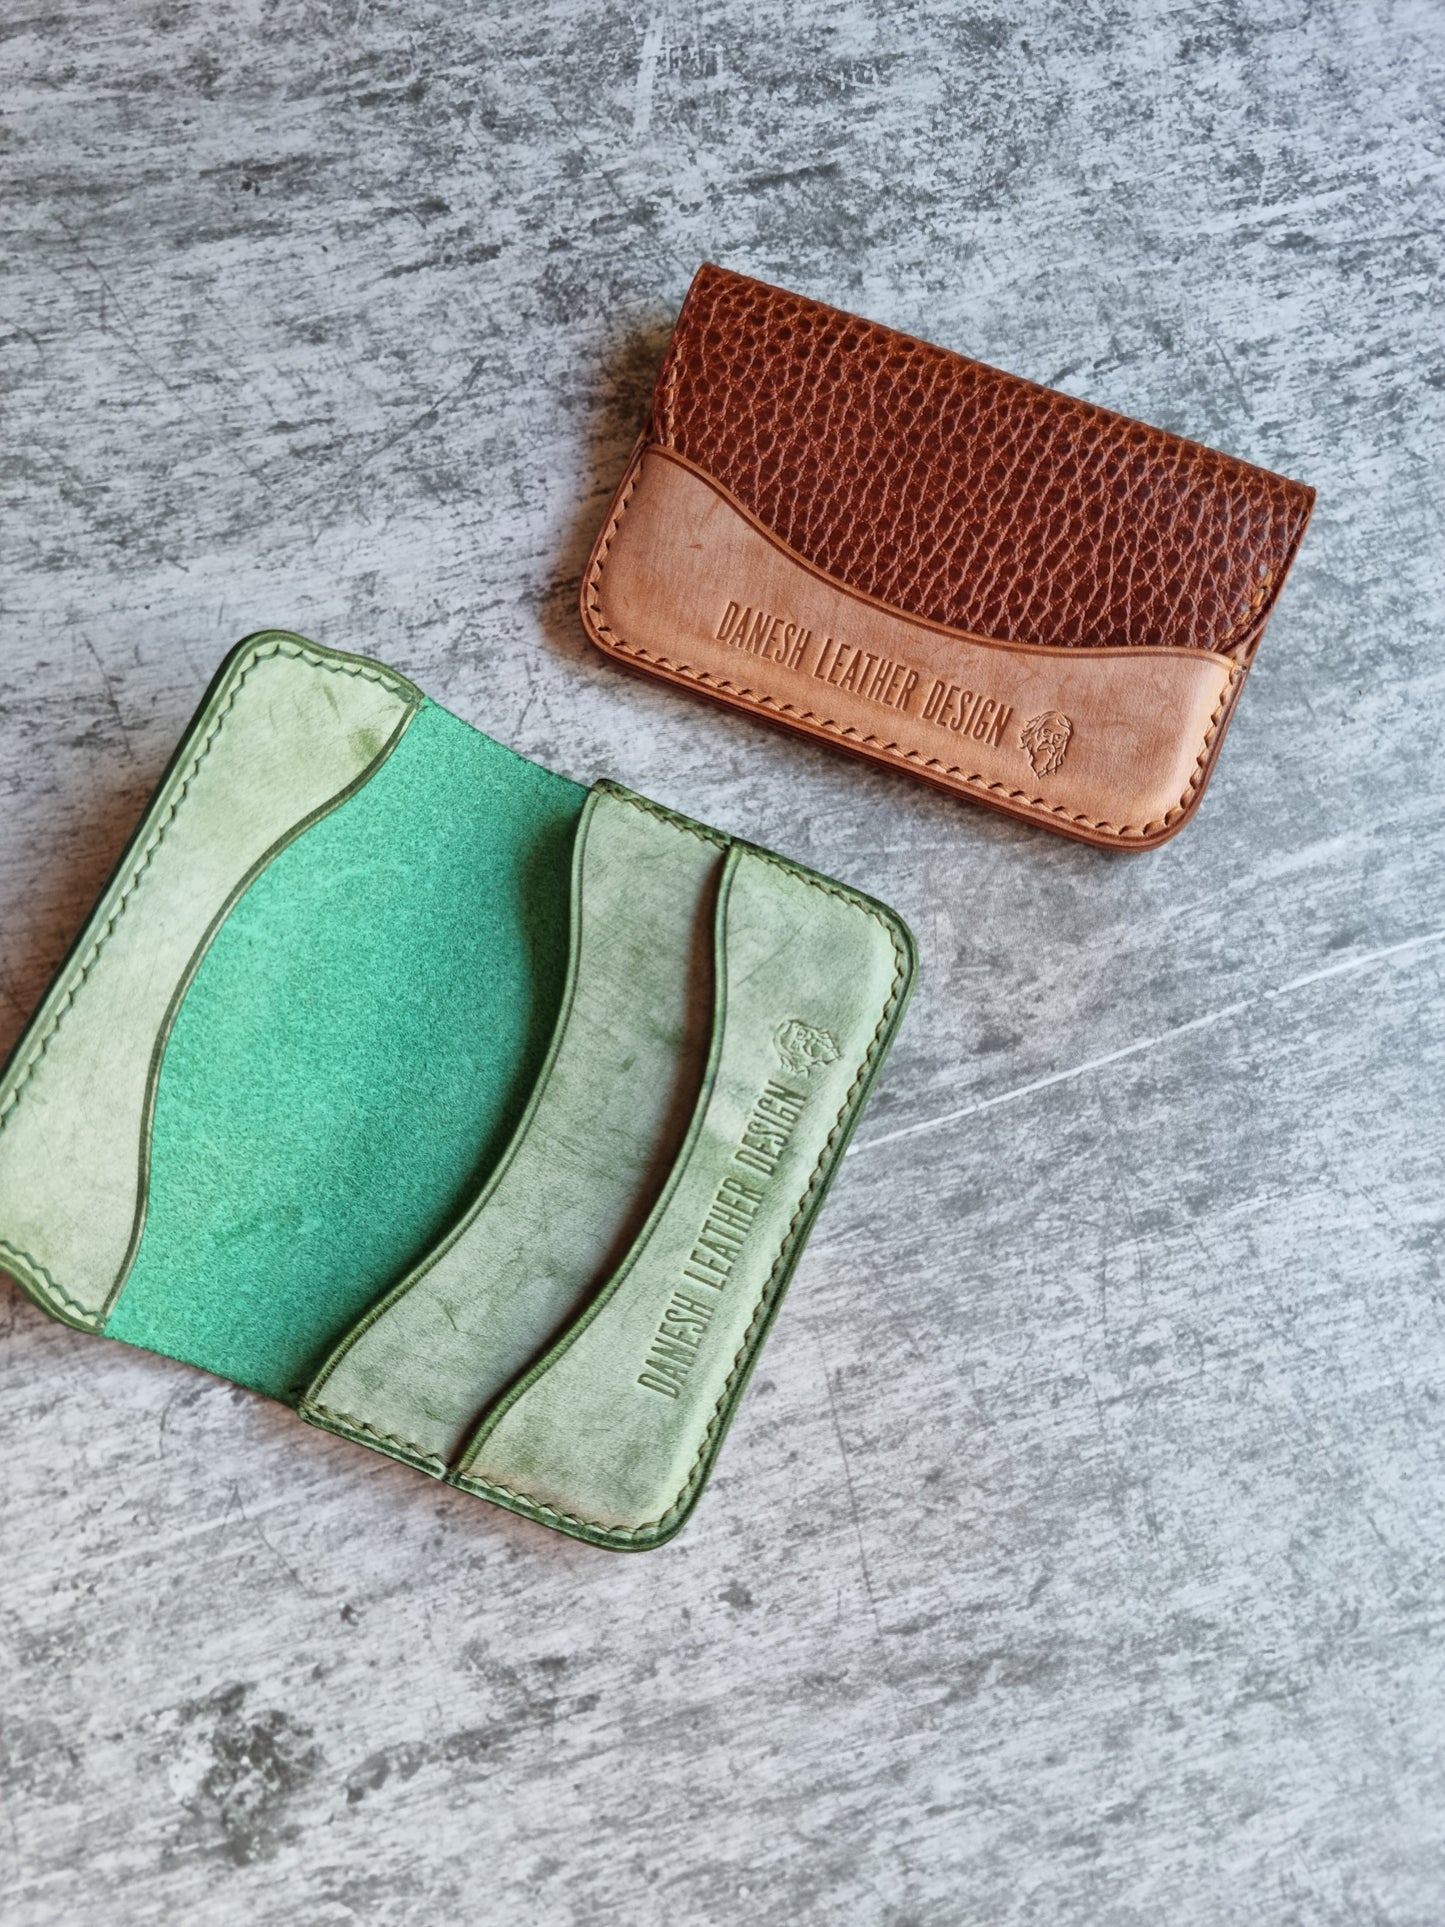 The Roo wallet | Leather flap wallet | Autumn22